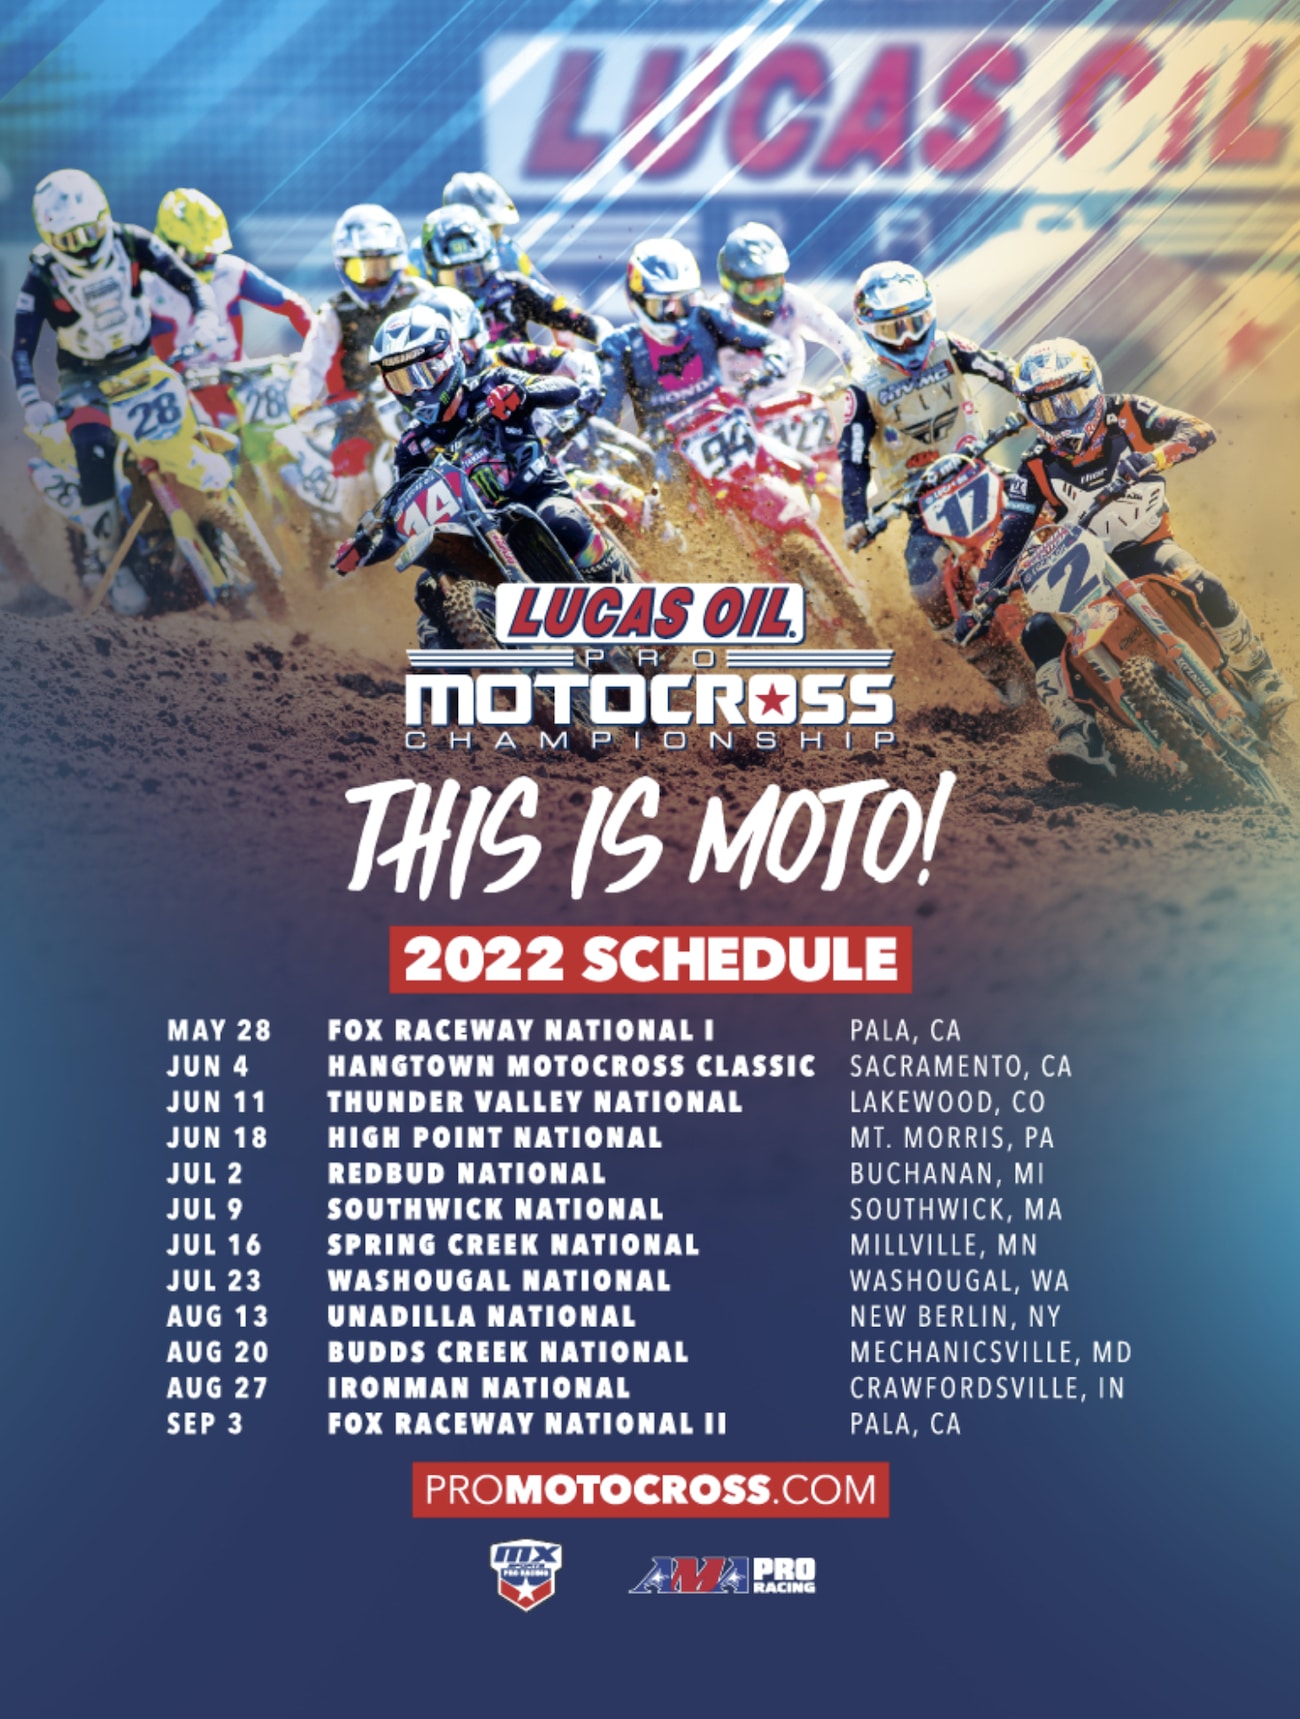 Lucas Oil Raceway 2022 Schedule 2022 Ama Pro Motocross Schedule: Starts At Pala On May 28, 2022 & Ends At  Pala On Sept. 3 - Motocross Action Magazine